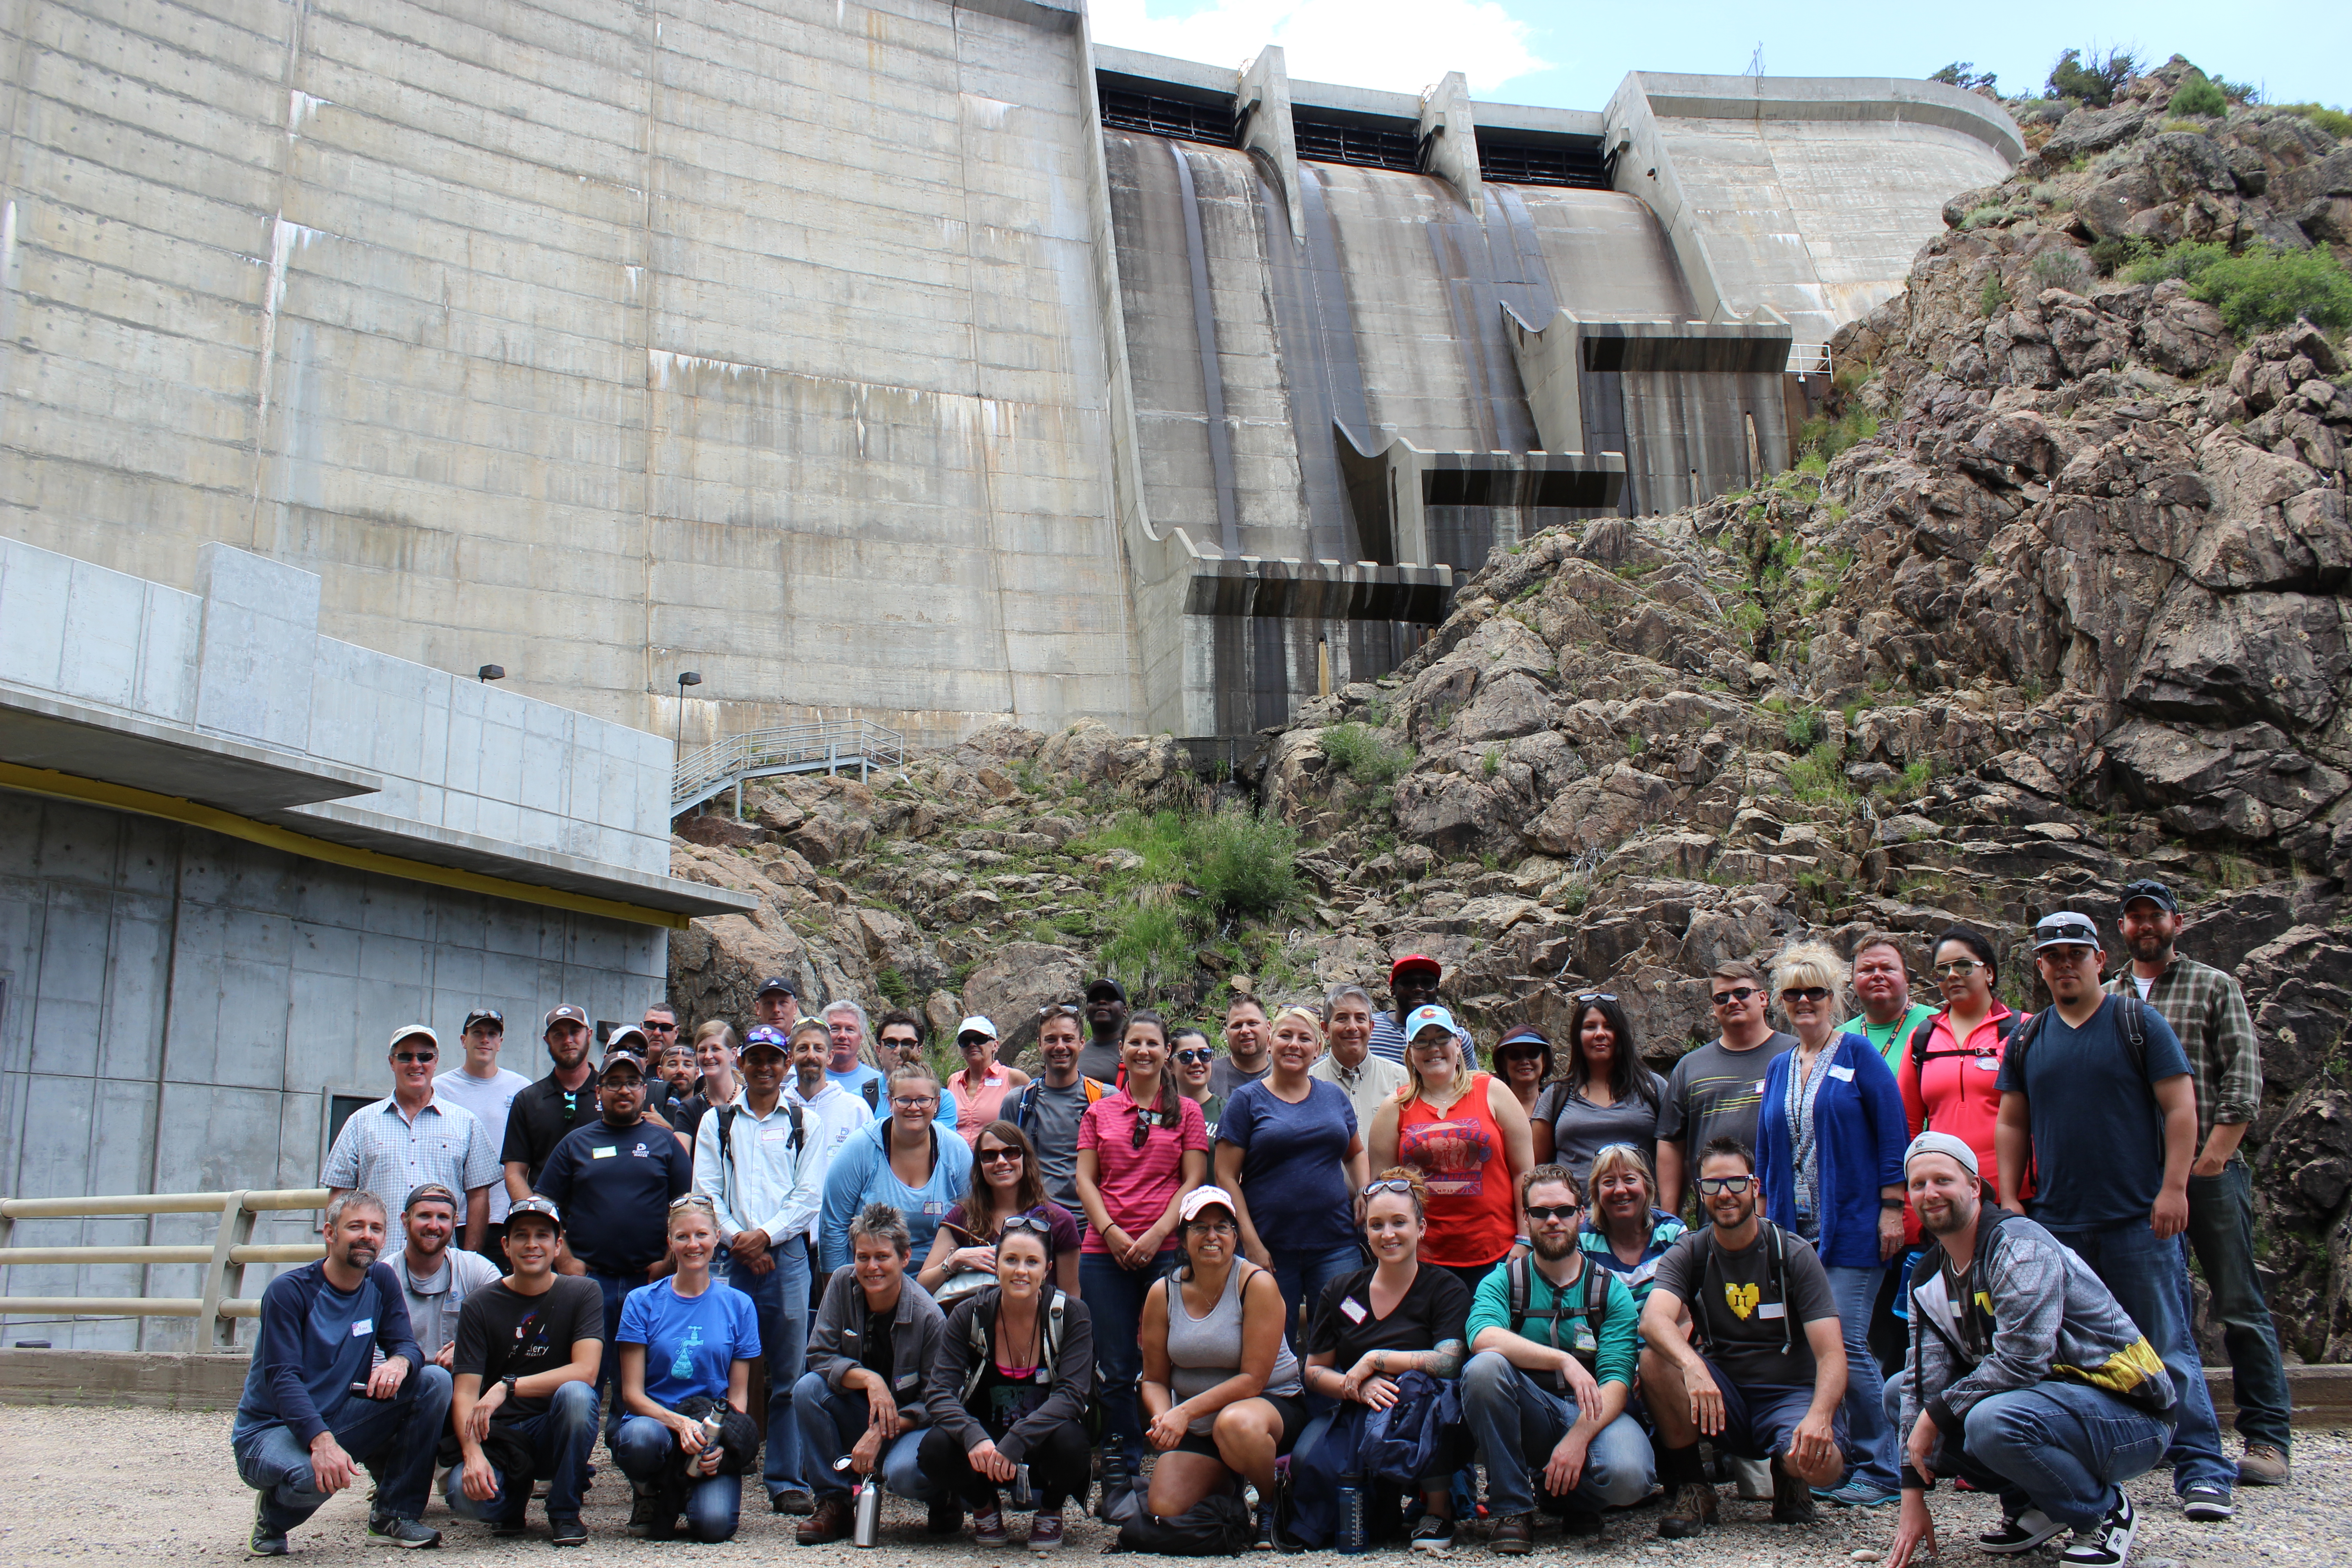 Employees gather in front of the Williams Fork dam after touring the hydroelectric plant.